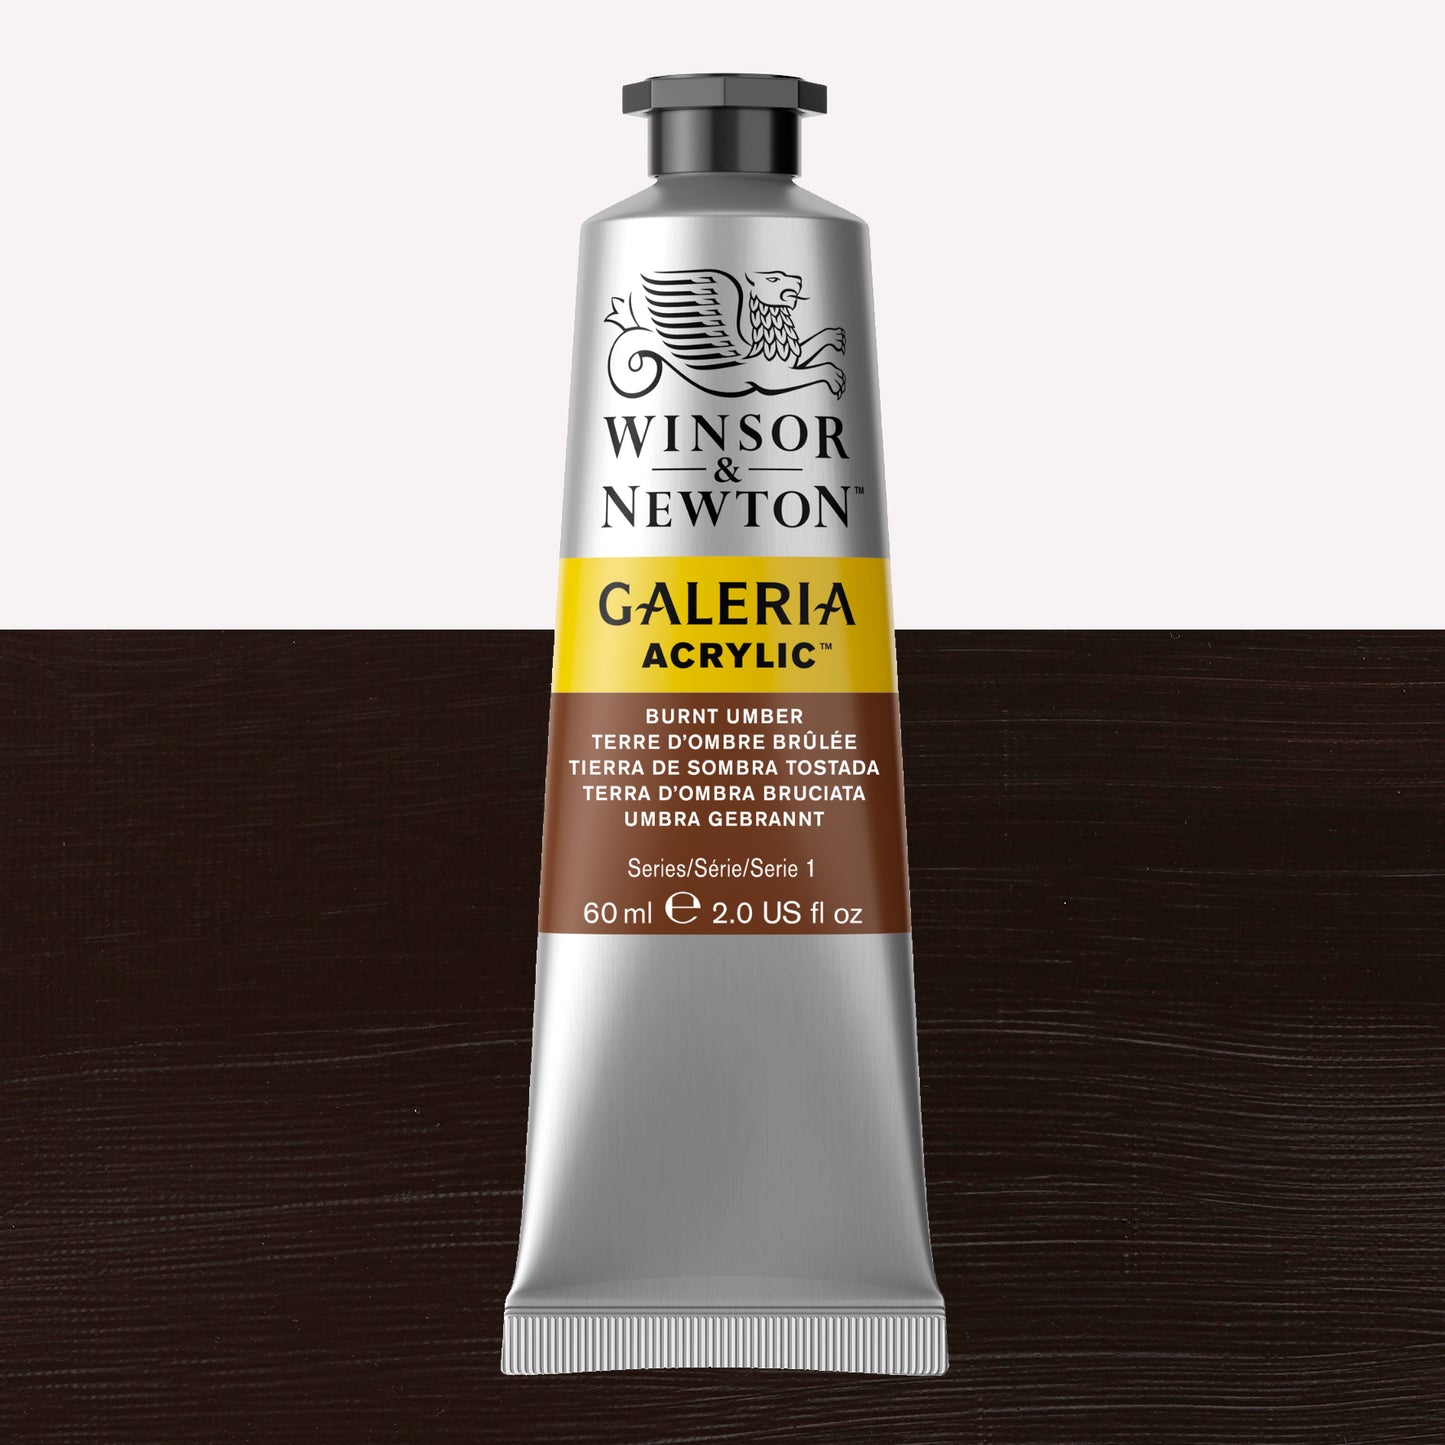 A 60ml tube of vibrant Galeria Acrylic paint in the shade Burnt Umber. This professional-quality paint is packaged in a silver tube with a black lid. Made by Winsor and Newton.